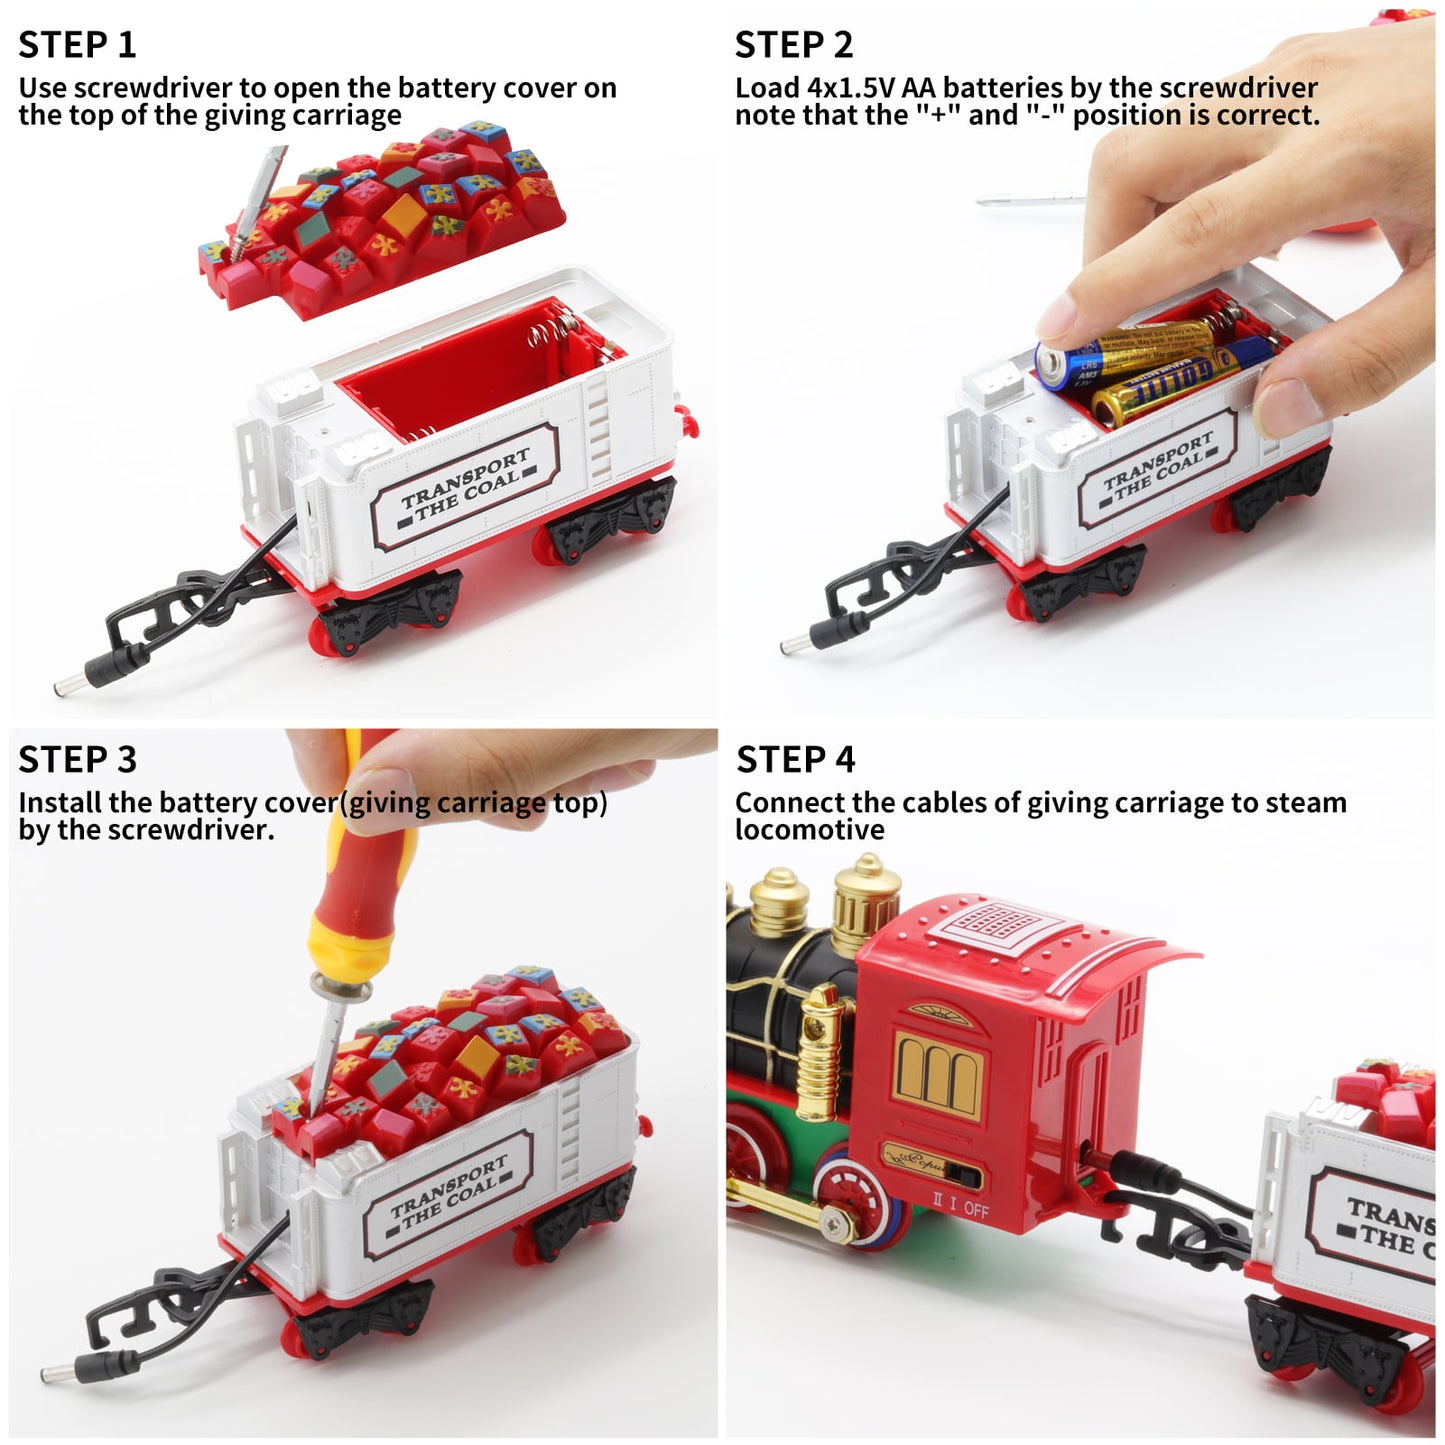 Christmas Electric Train Set Toy for Kids, Train with Smoke, Realistic Lights&Sounds, 4 Cars and Tracks Kits, Gifts for Boys Girls Age 3+